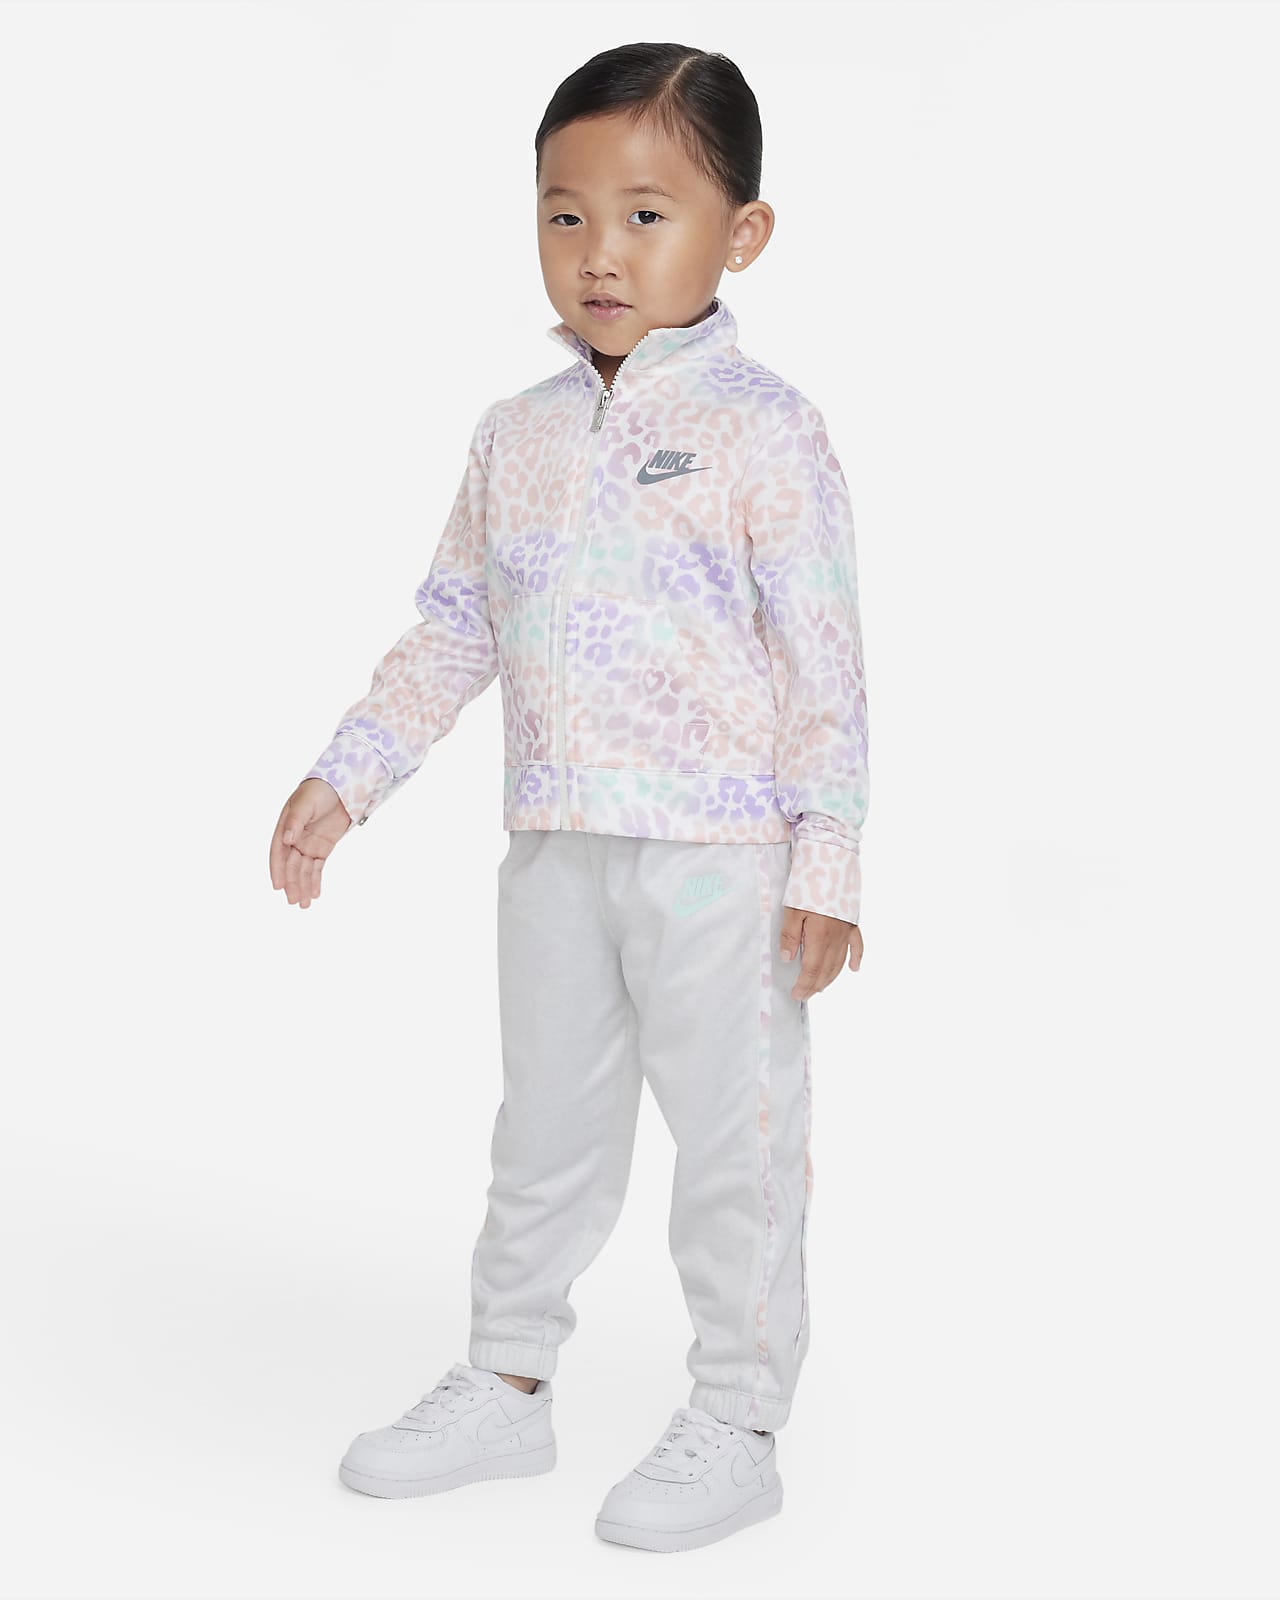 Nike Spot-On Tricot Set Toddler Tracksuit